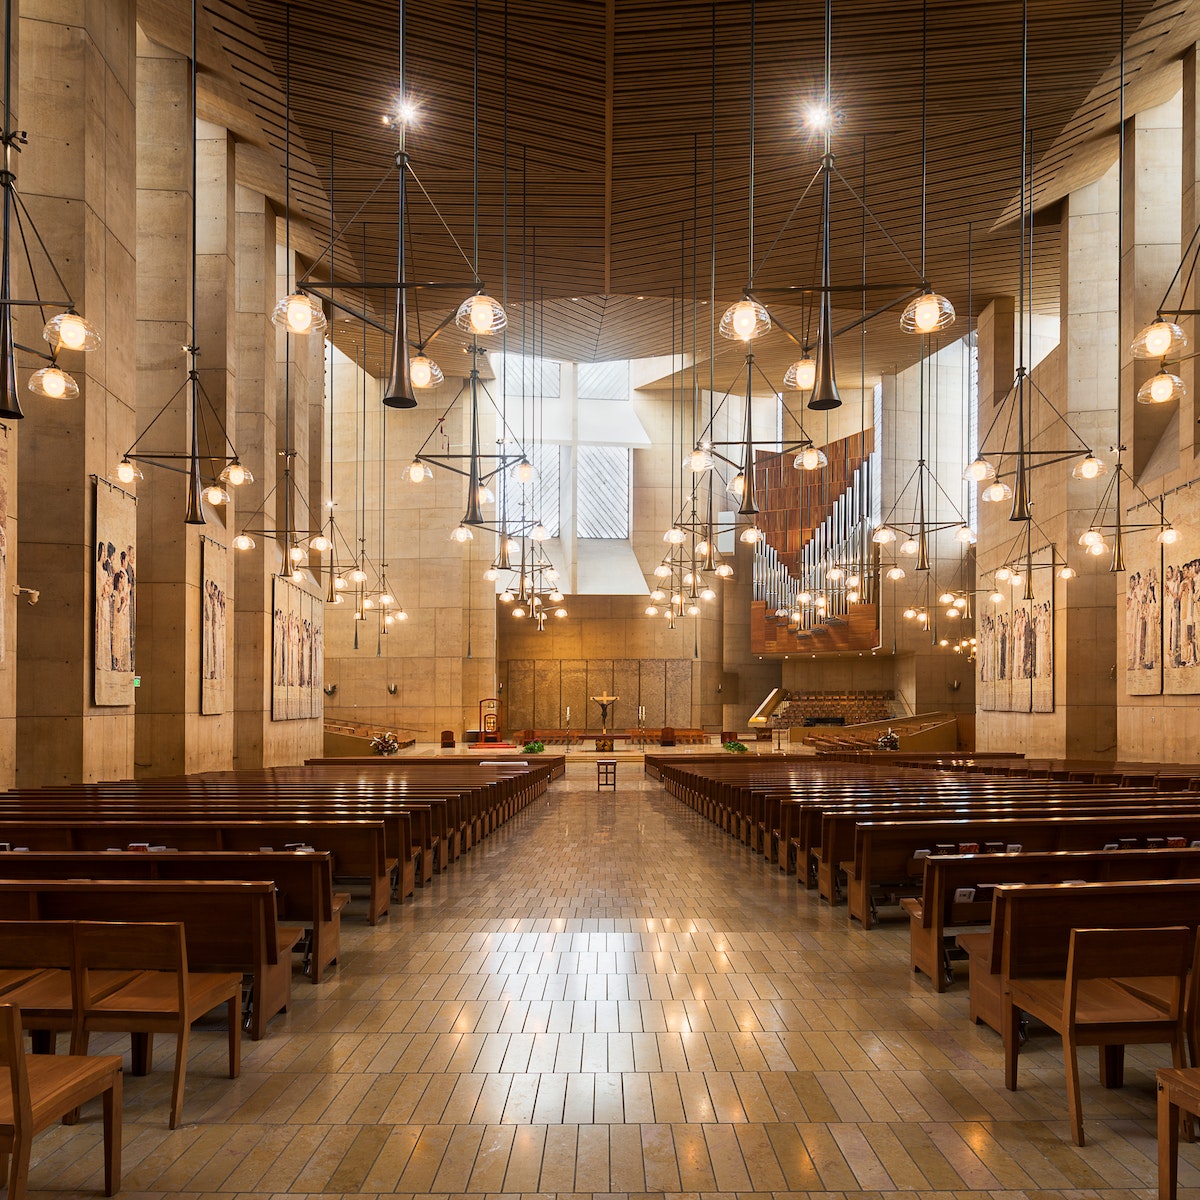 Interior of the Cathedral of Our Lady of the Angels in Los Angeles, California.